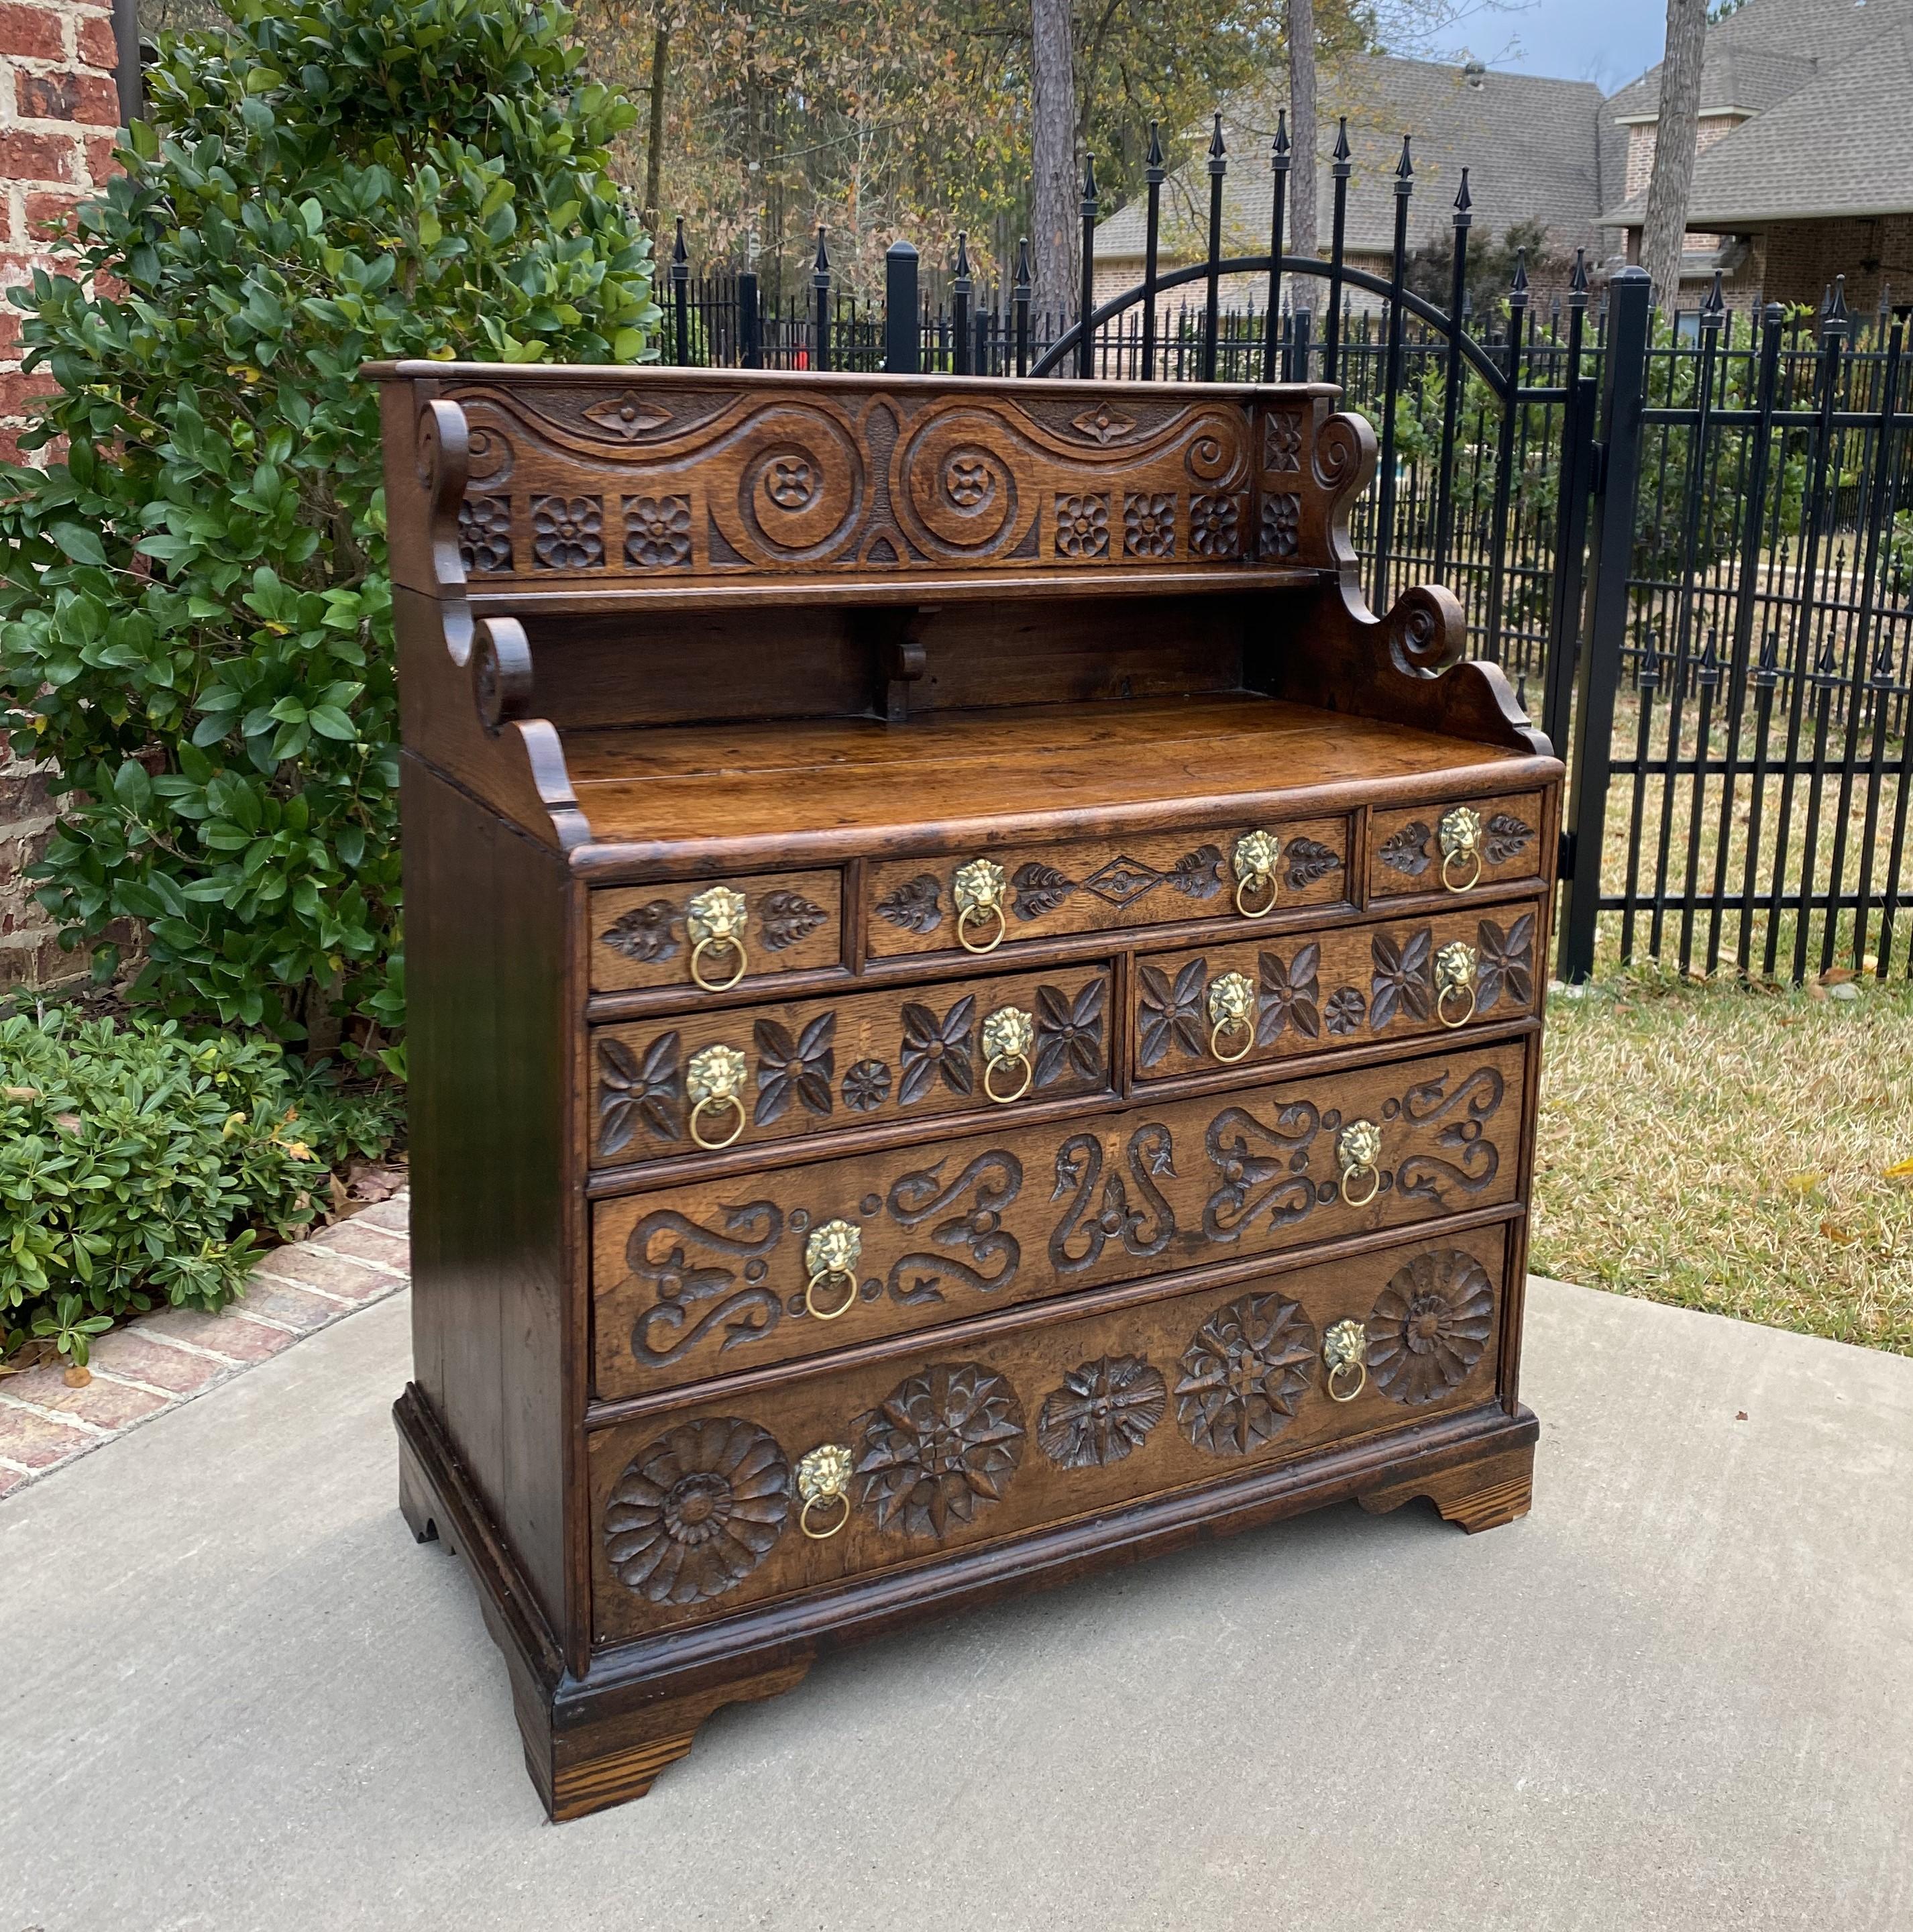 Exquisite antique english oak 18th century Georgian era chest of drawers~~brass lion pulls with upper shelf and gallery~~pre-1800

A must have~~gorgeous example of an 18th century English chest with unique upper shelf and gallery~~ 7 drawers with